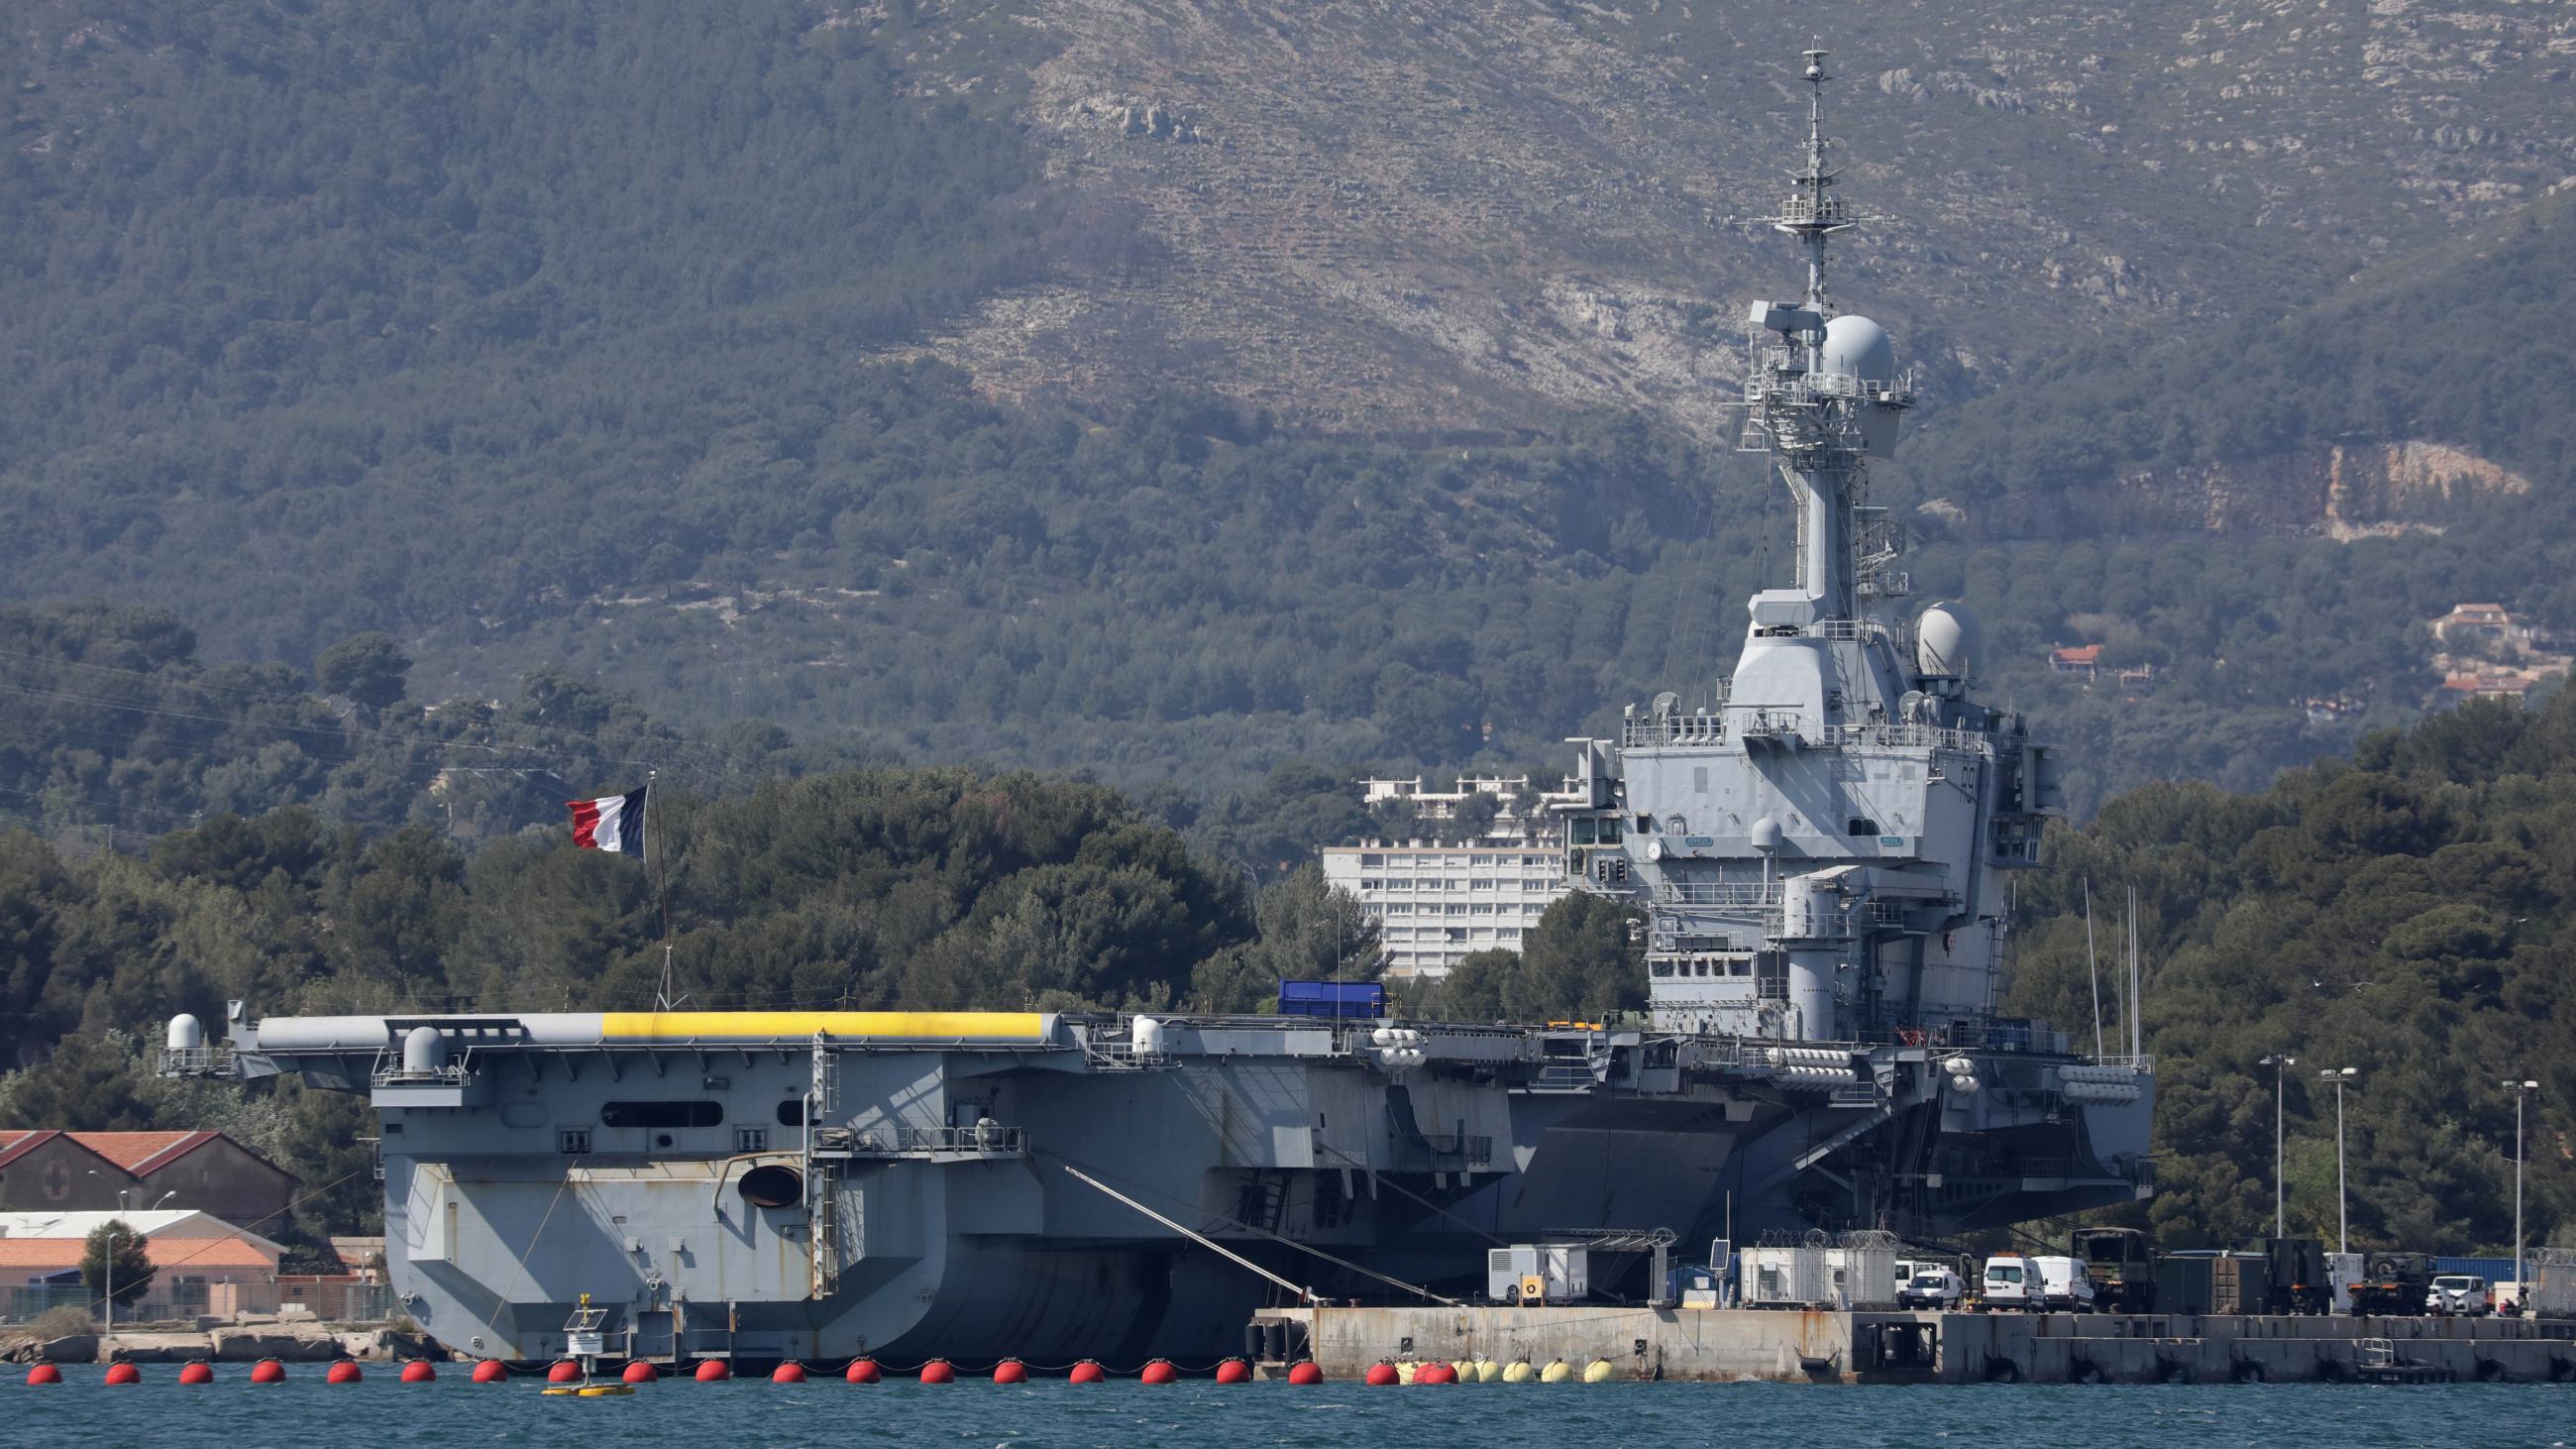 An aircraft carrier waving the French tricolor flag is docked at a port against a backdrop of mountains.